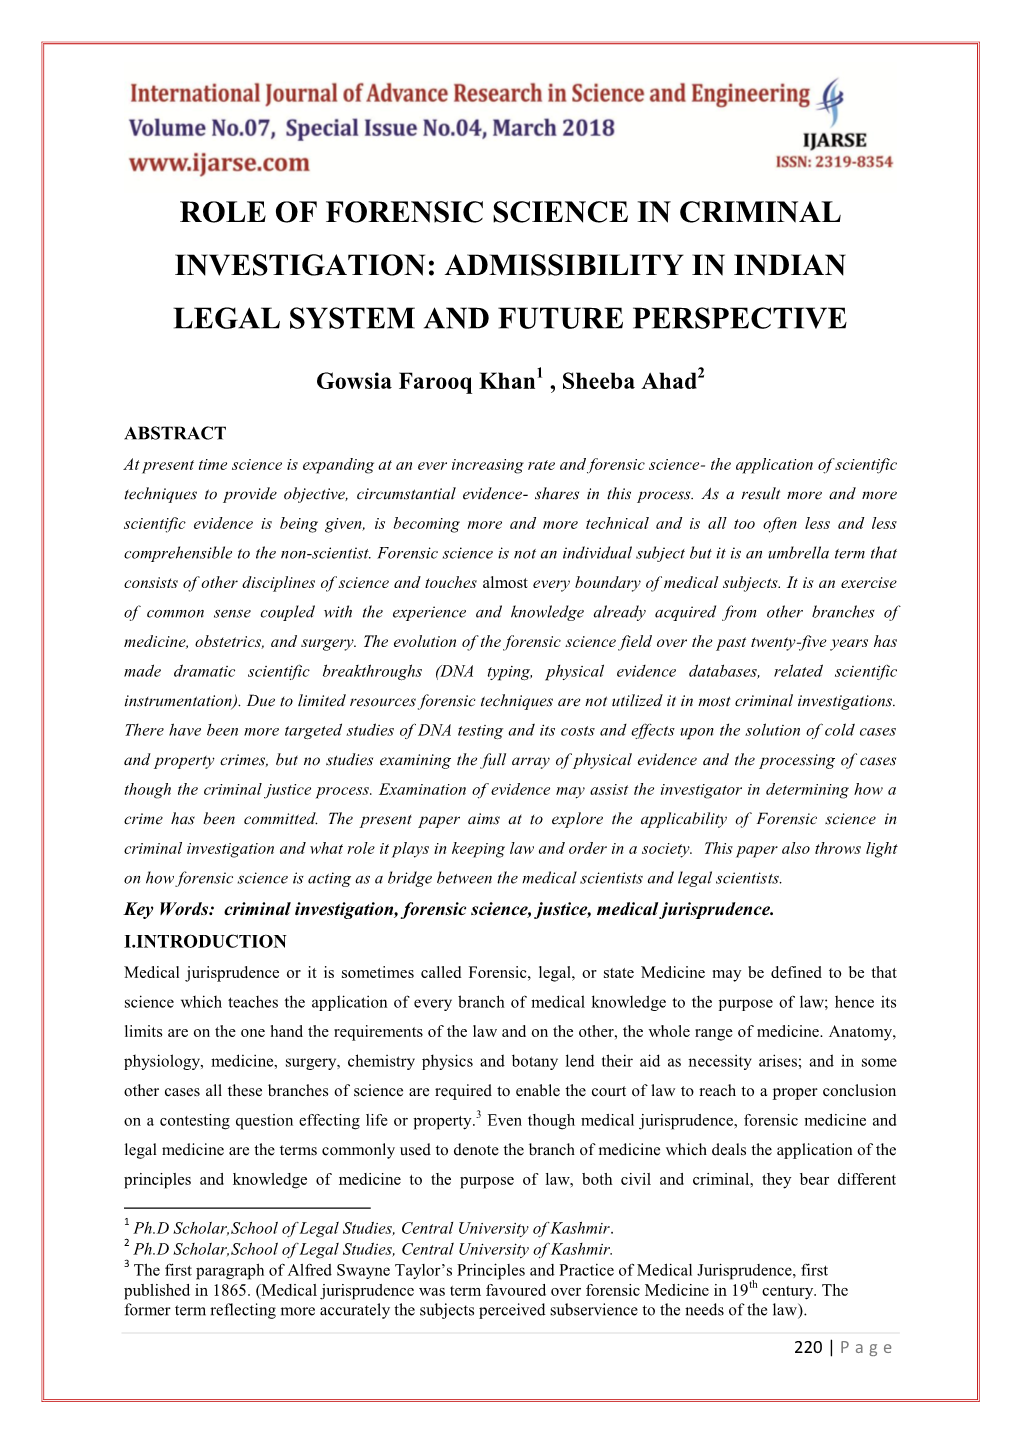 Role of Forensic Science in Criminal Investigation: Admissibility in Indian Legal System and Future Perspective